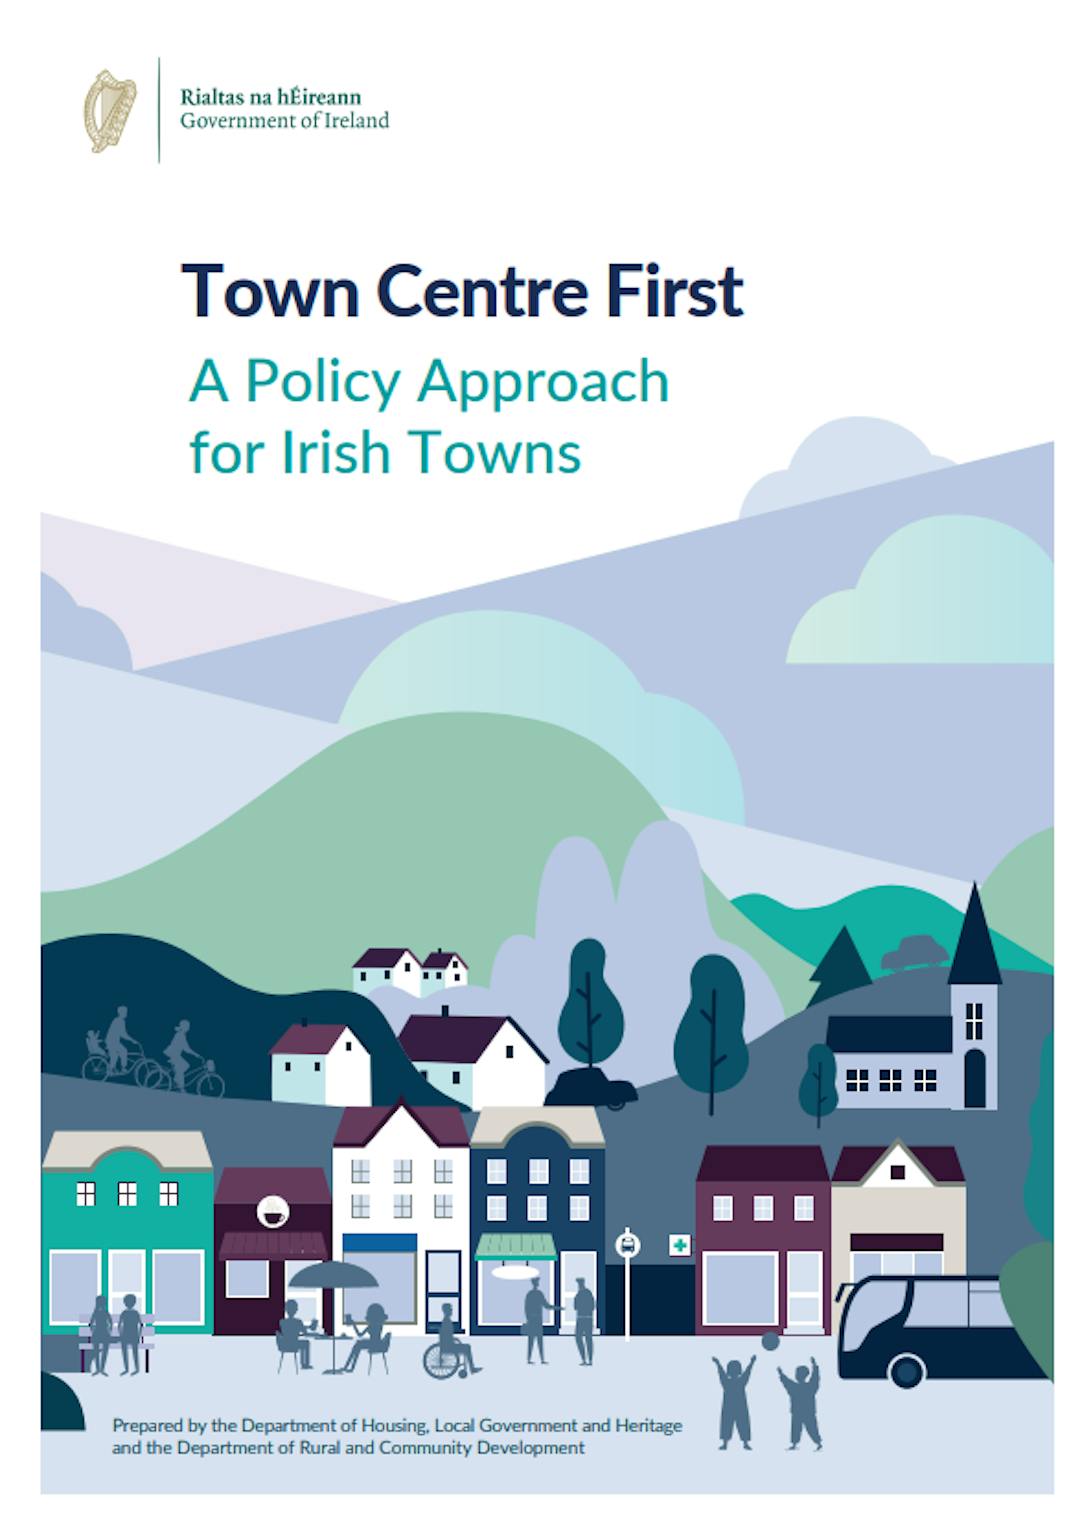 Town Centre First A Policy Approach for Irish Towns